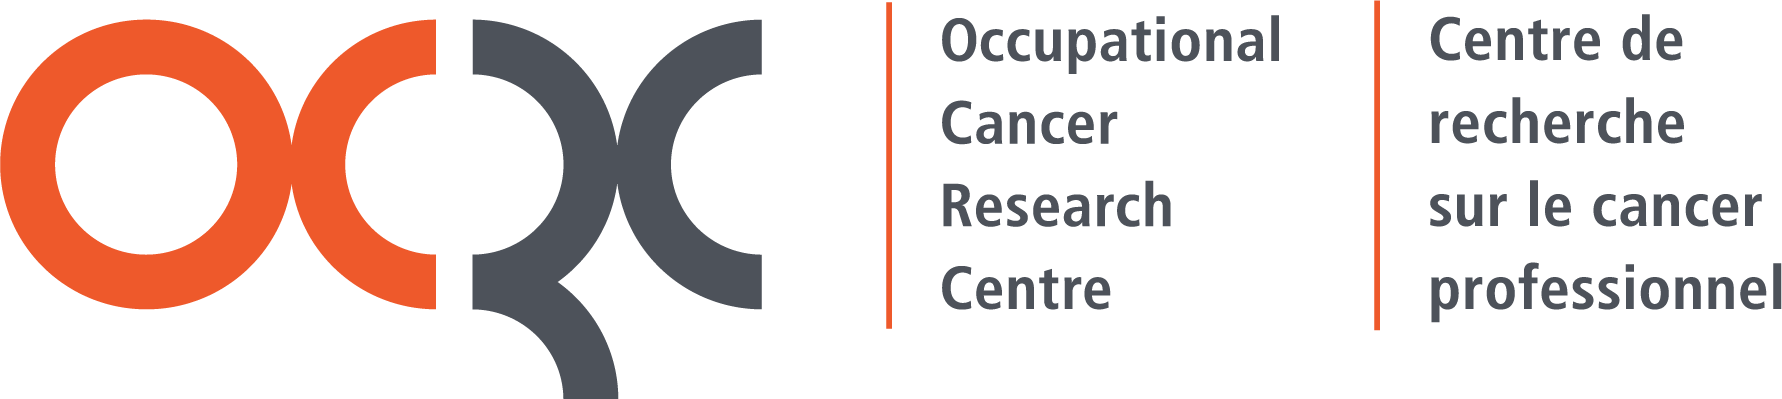 Occupational Cancer Research Centre, Ontario Health logo